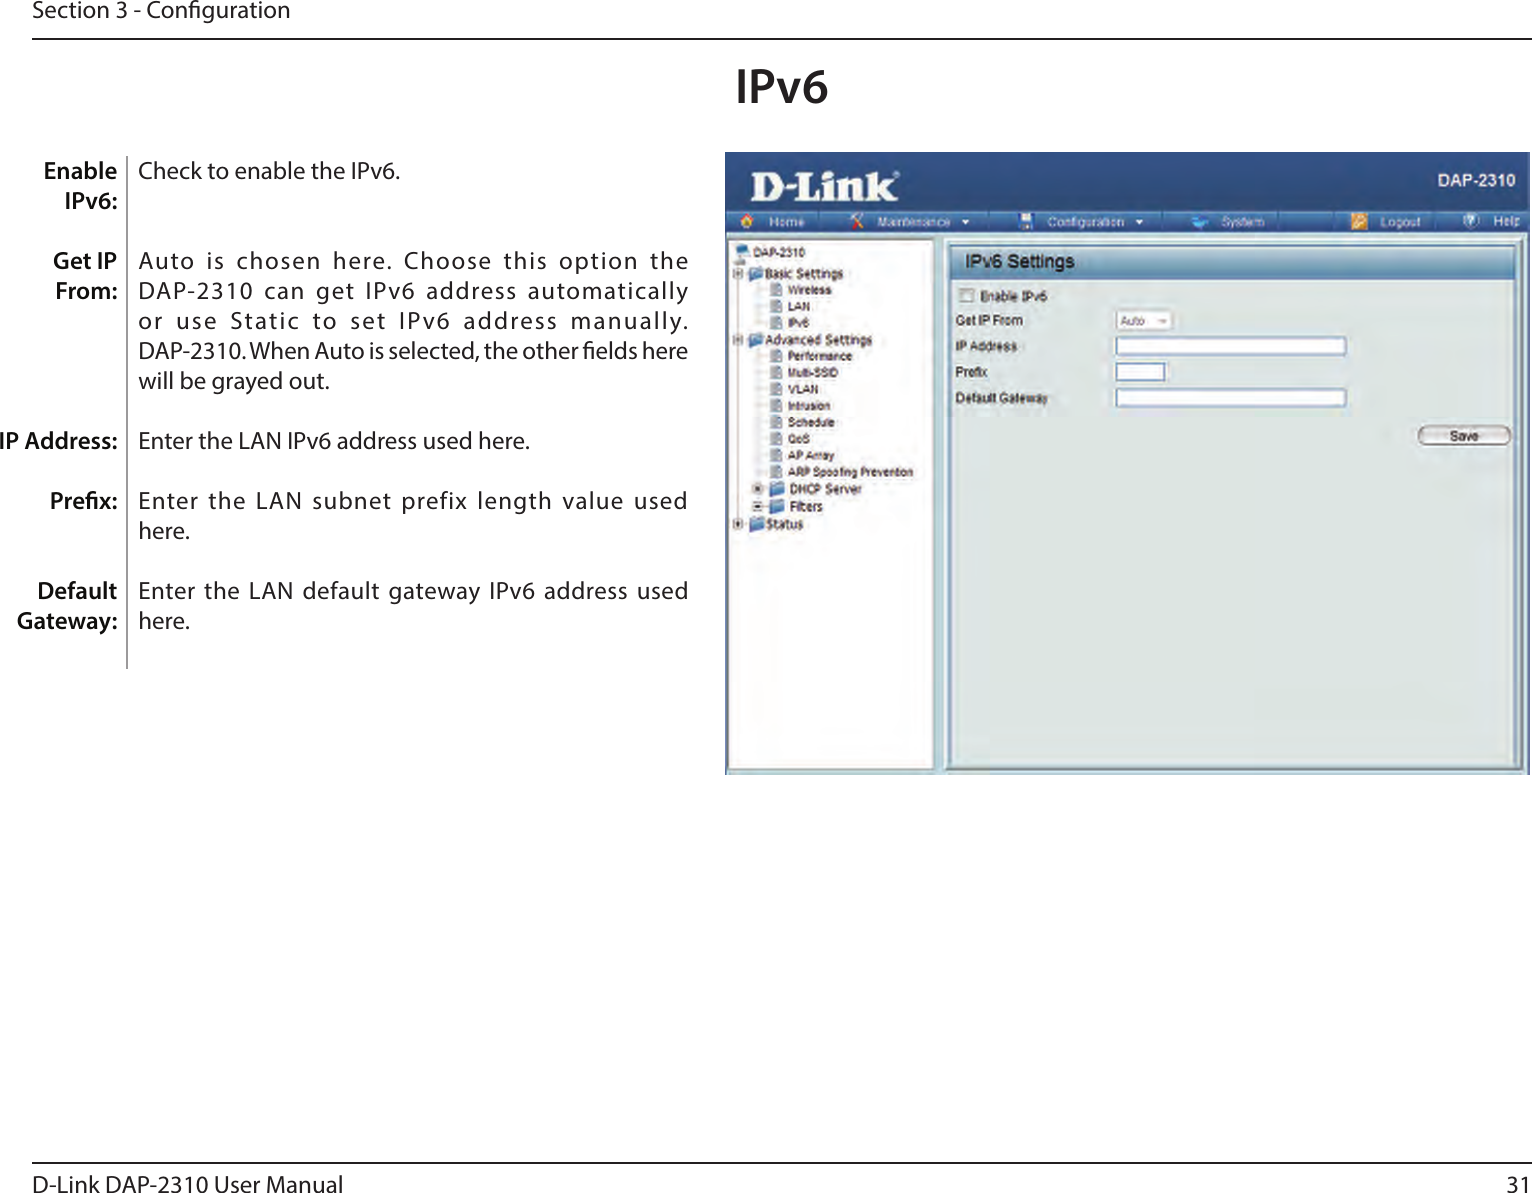 31D-Link DAP-2310 User ManualSection 3 - CongurationCheck to enable the IPv6.Auto  is  chosen  here.  Choose  this  option  the DAP-2310  can  get  IPv6  address  automatically or  use  Static  to  set  IPv6  address  manually. DAP-2310. When Auto is selected, the other elds here will be grayed out.Enter the LAN IPv6 address used here.Enter the LAN subnet prefix length value used here.Enter the LAN default gateway IPv6  address used here. Enable IPv6:Get IP From: IP Address:Prex:Default Gateway:IPv6